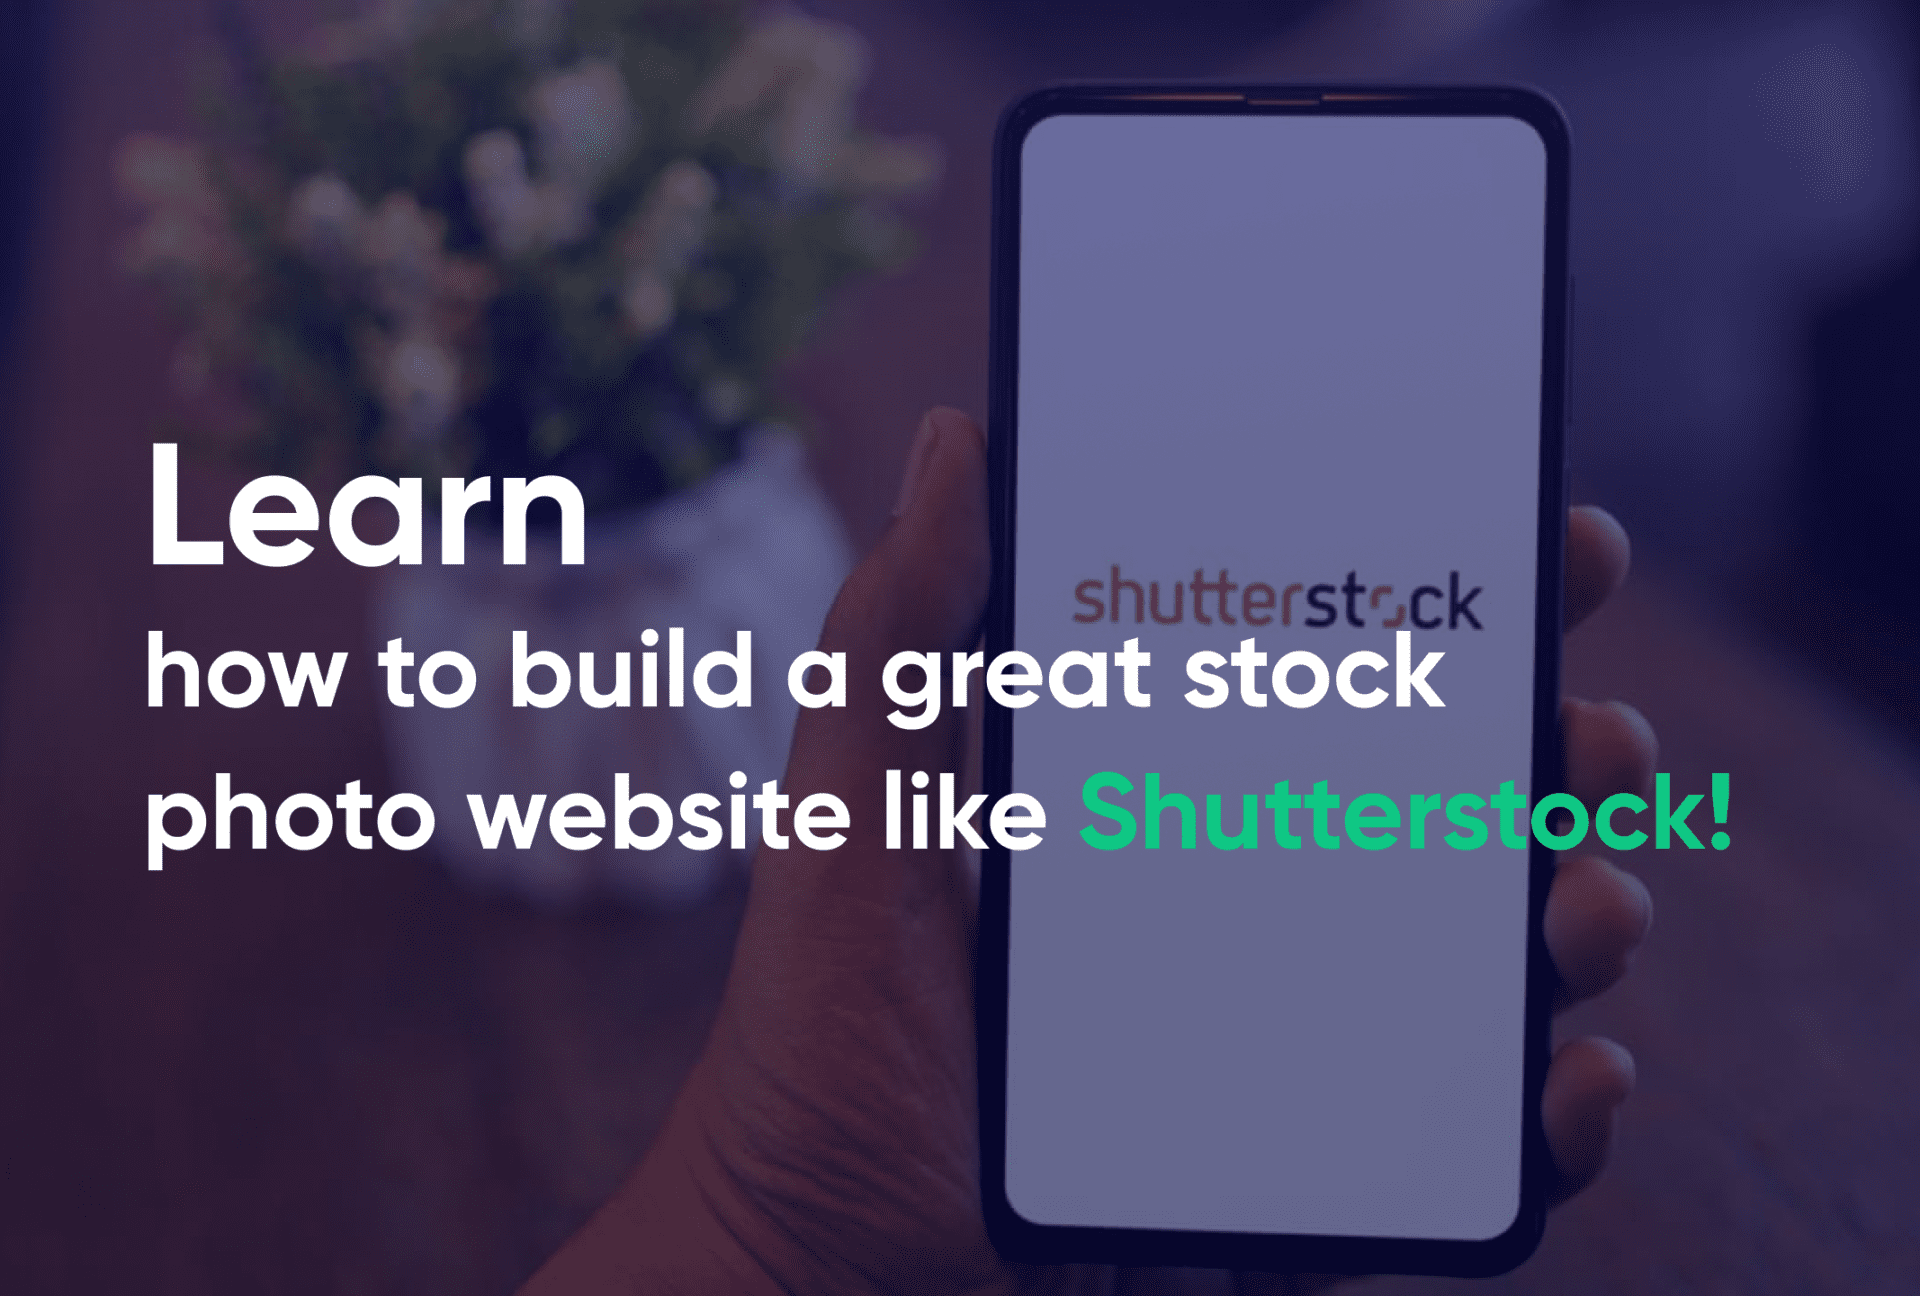 Learn how to build a great stock photo website like Shutterstock